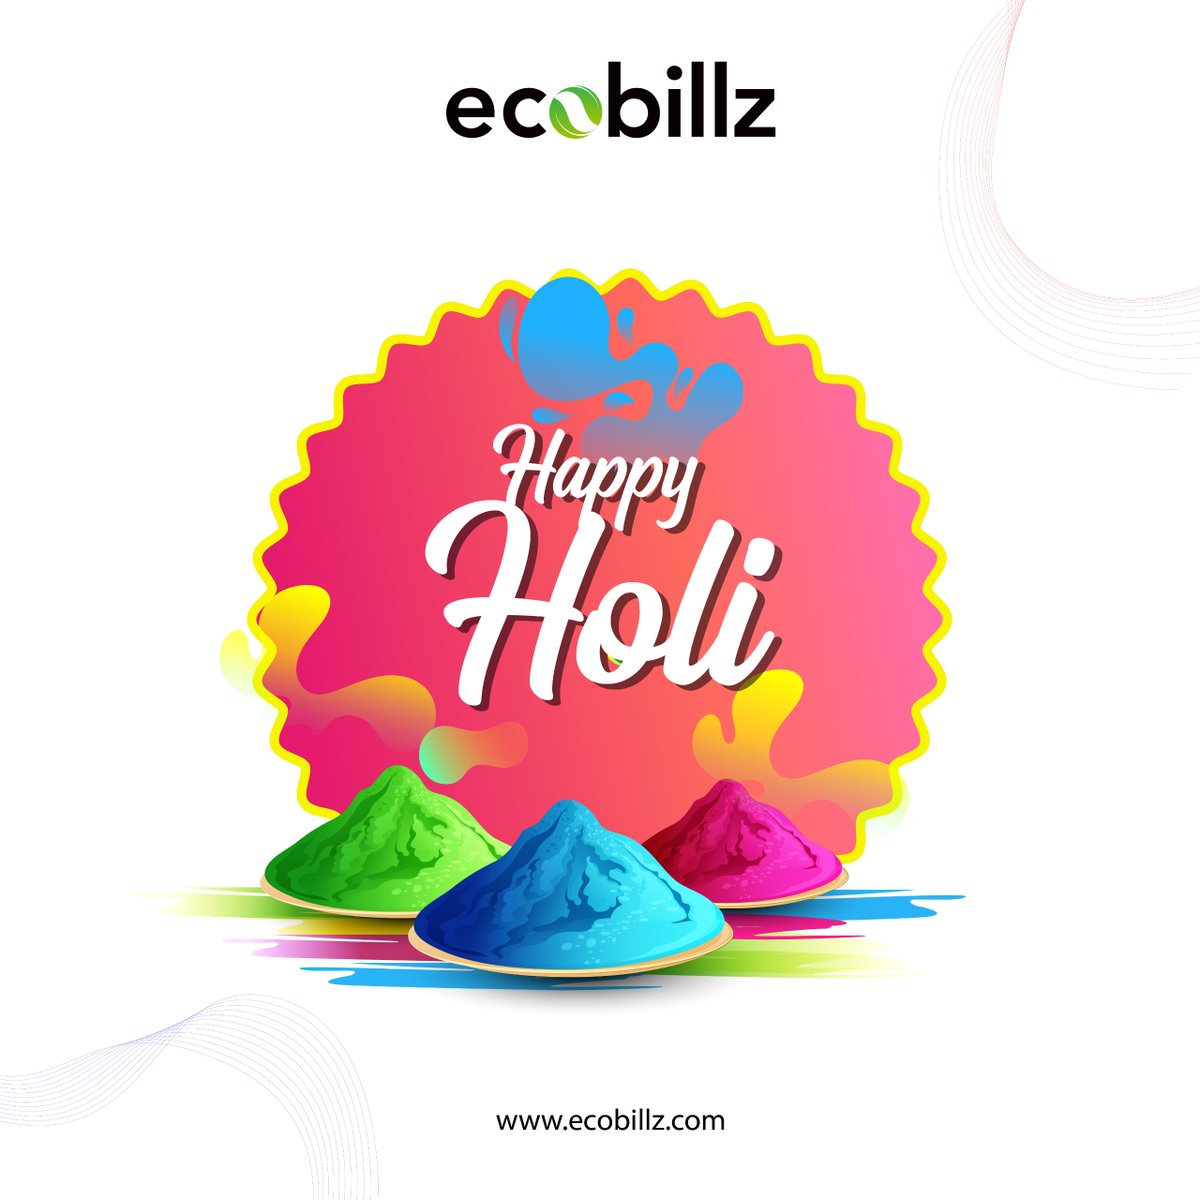 @Ecobillz Private Limited wishing you a Holi filled with the color of joy, laughter and joy ! #holi #holi2024 #happyholi #joy #laughter #festivalofcolours #warmth #heart #brightness #automation #hospitality #hospitalitytech #hospitalitytechnology